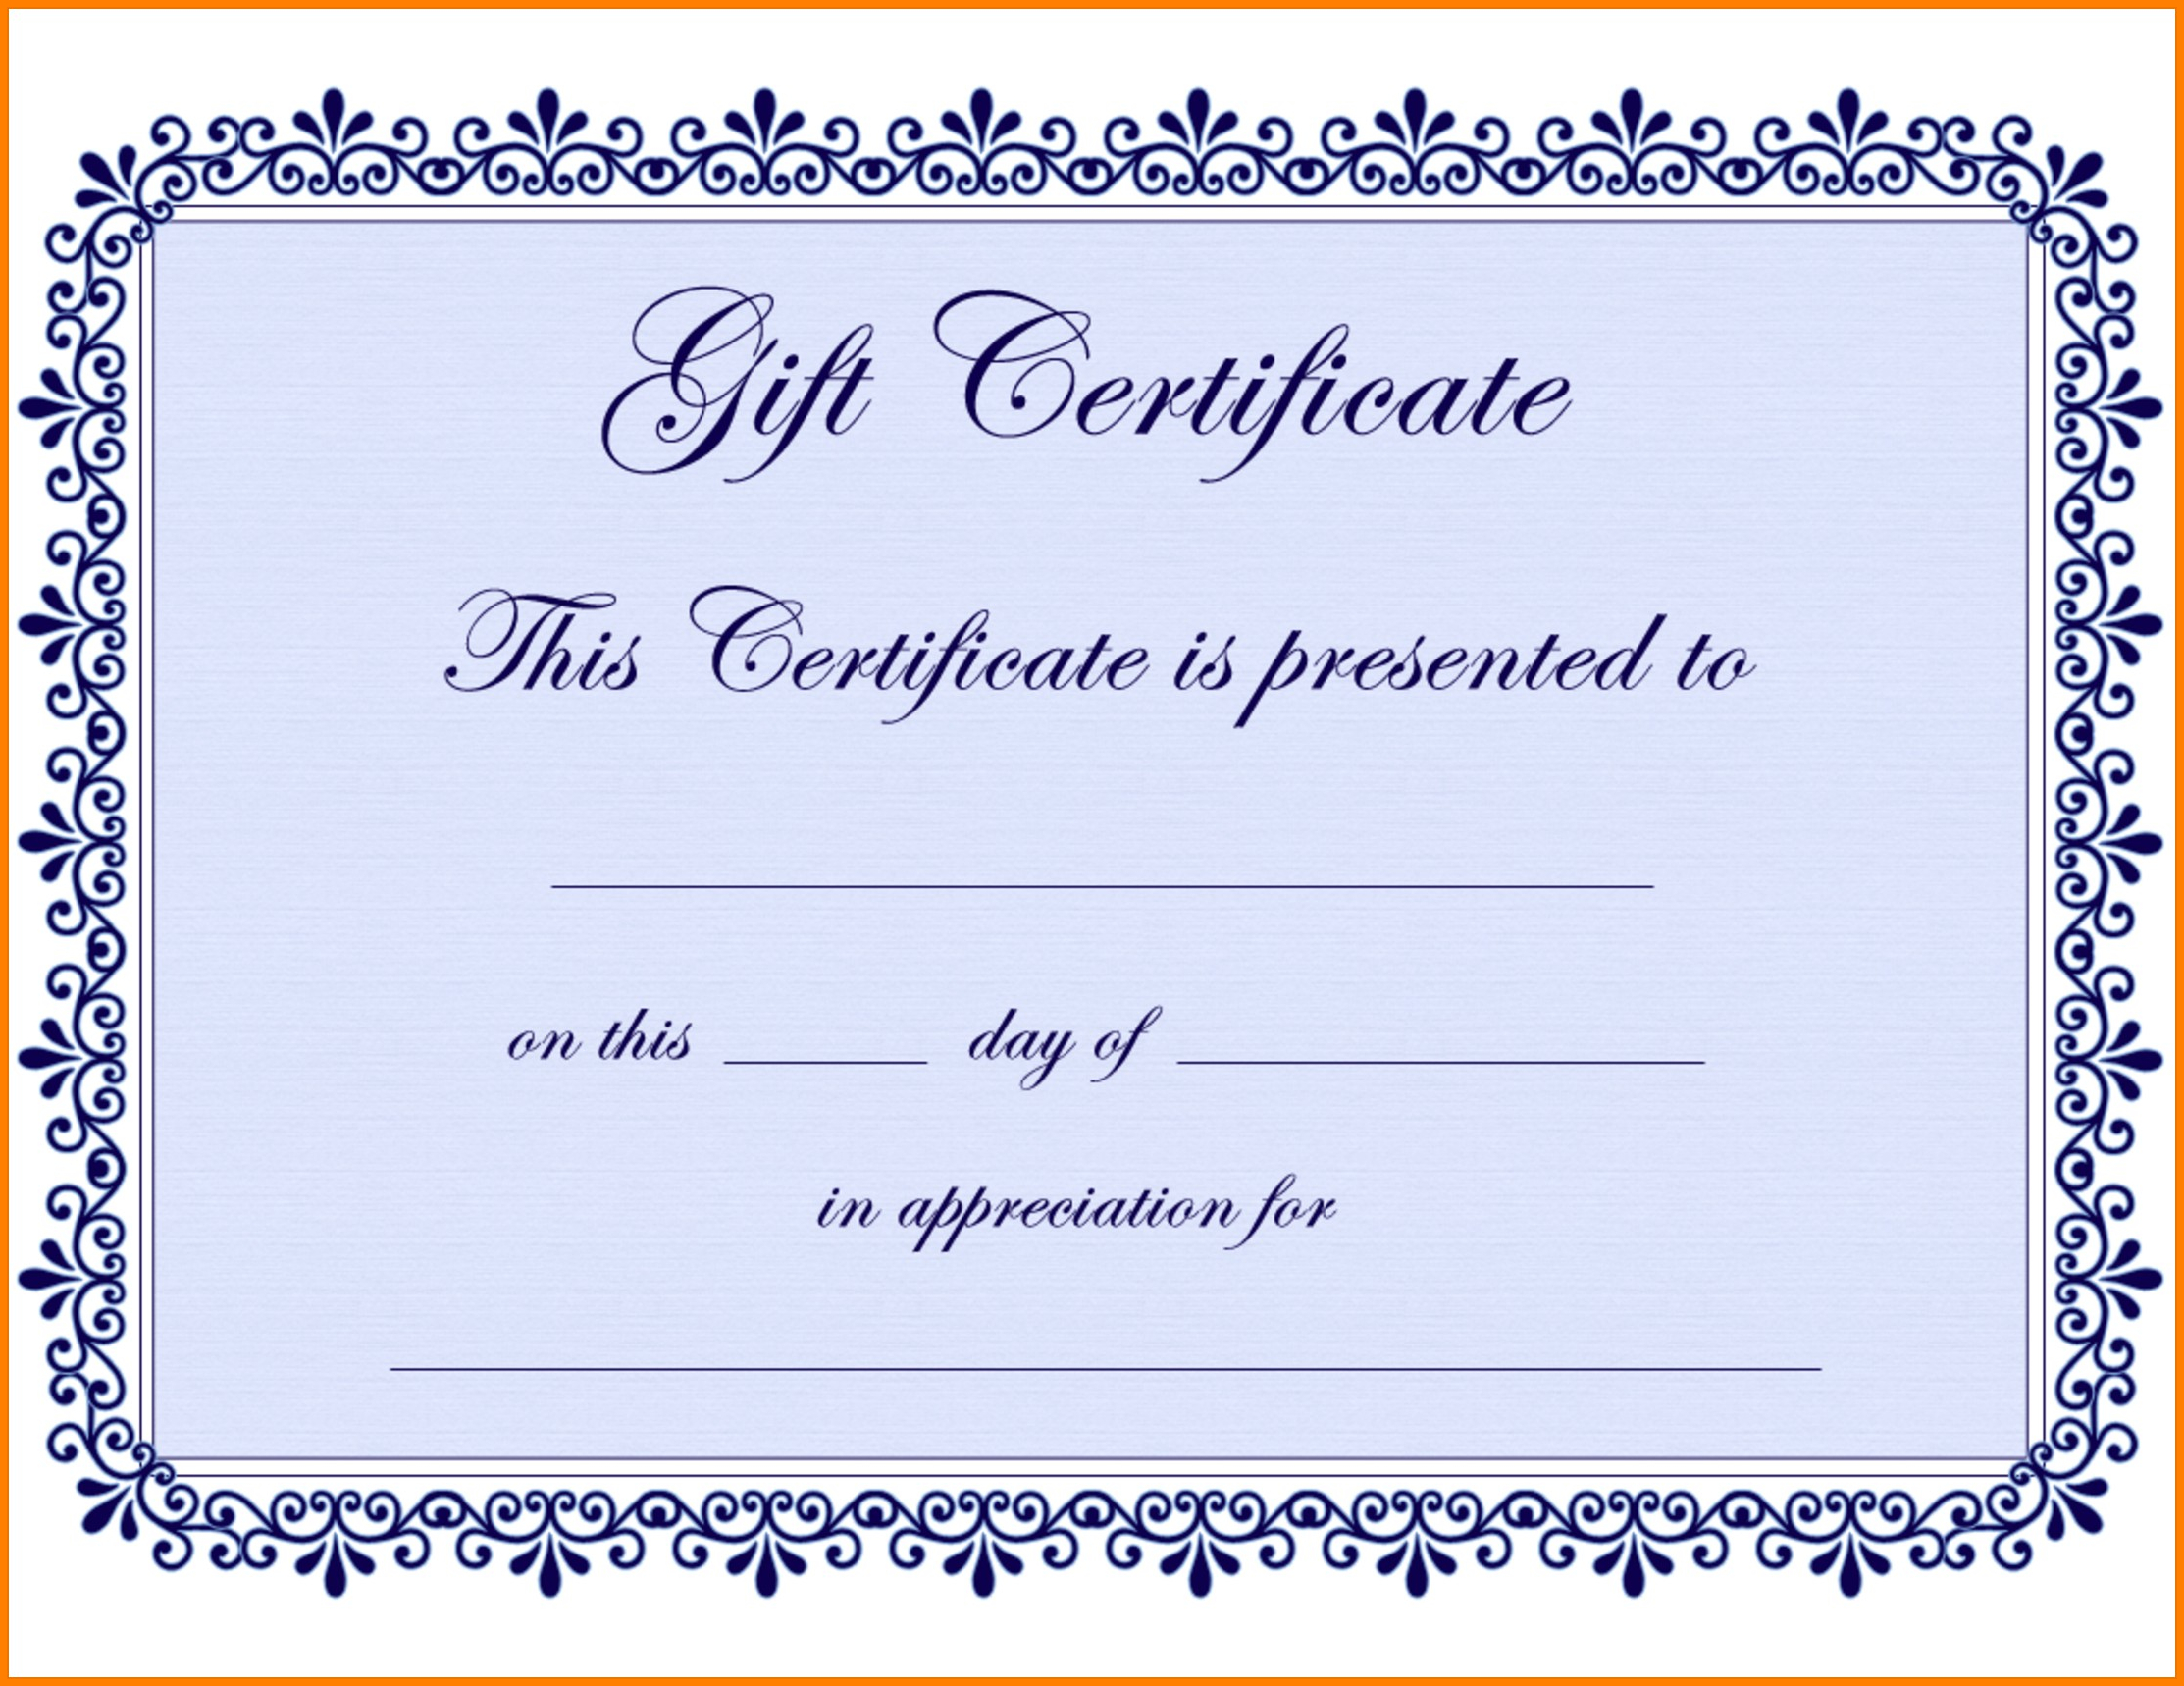 Gift Certificate Template Png | Certificatetemplategift Regarding Free Certificate Templates For Word 2007